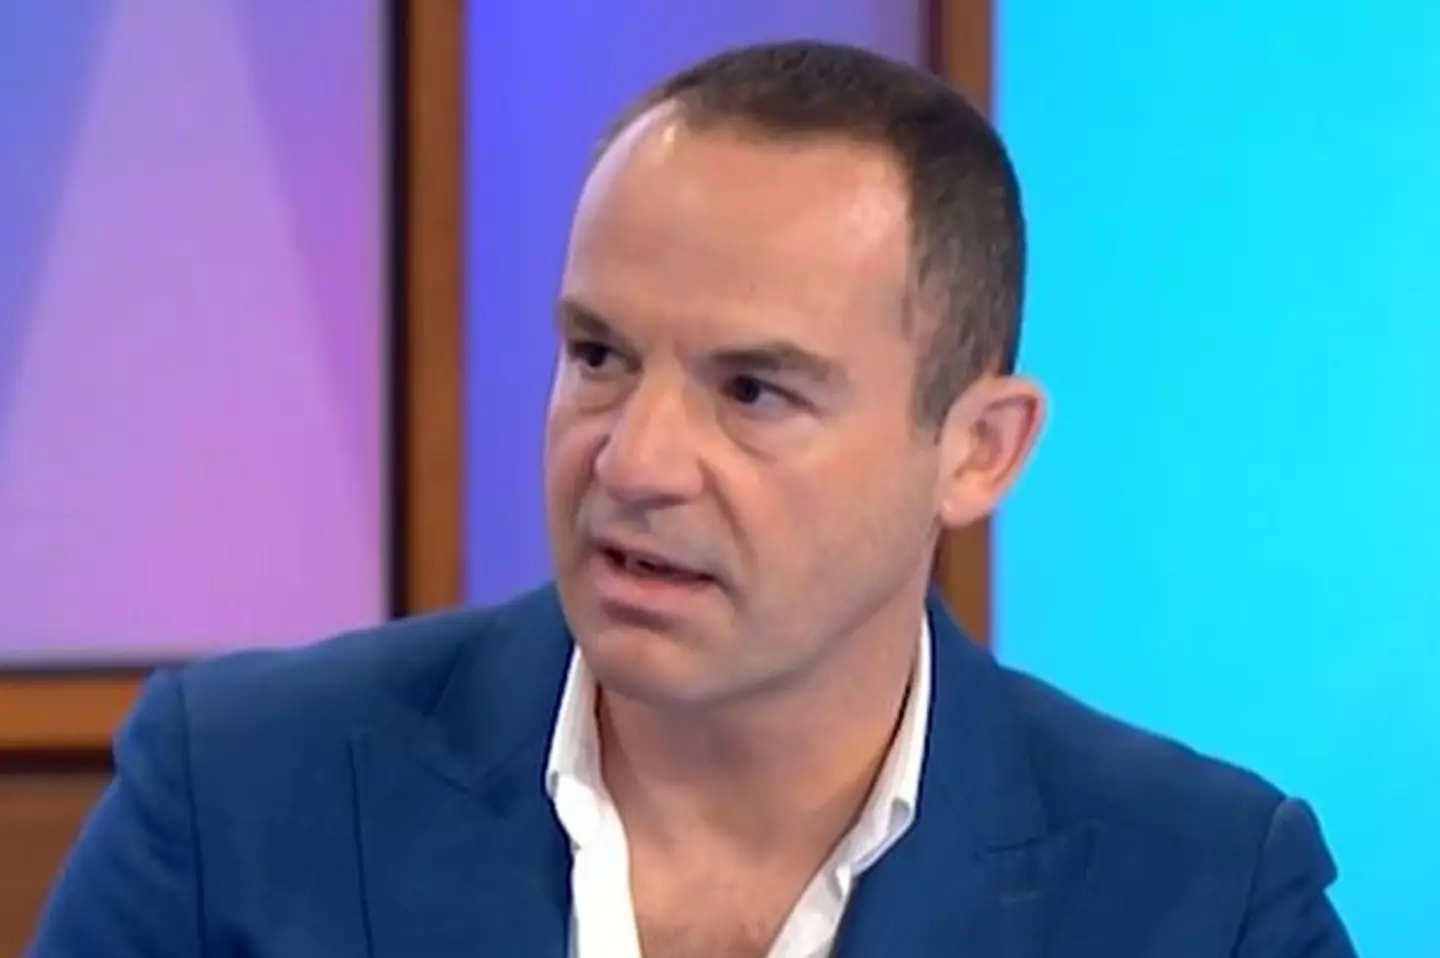 Martin Lewis has issued a warning for homeowners.